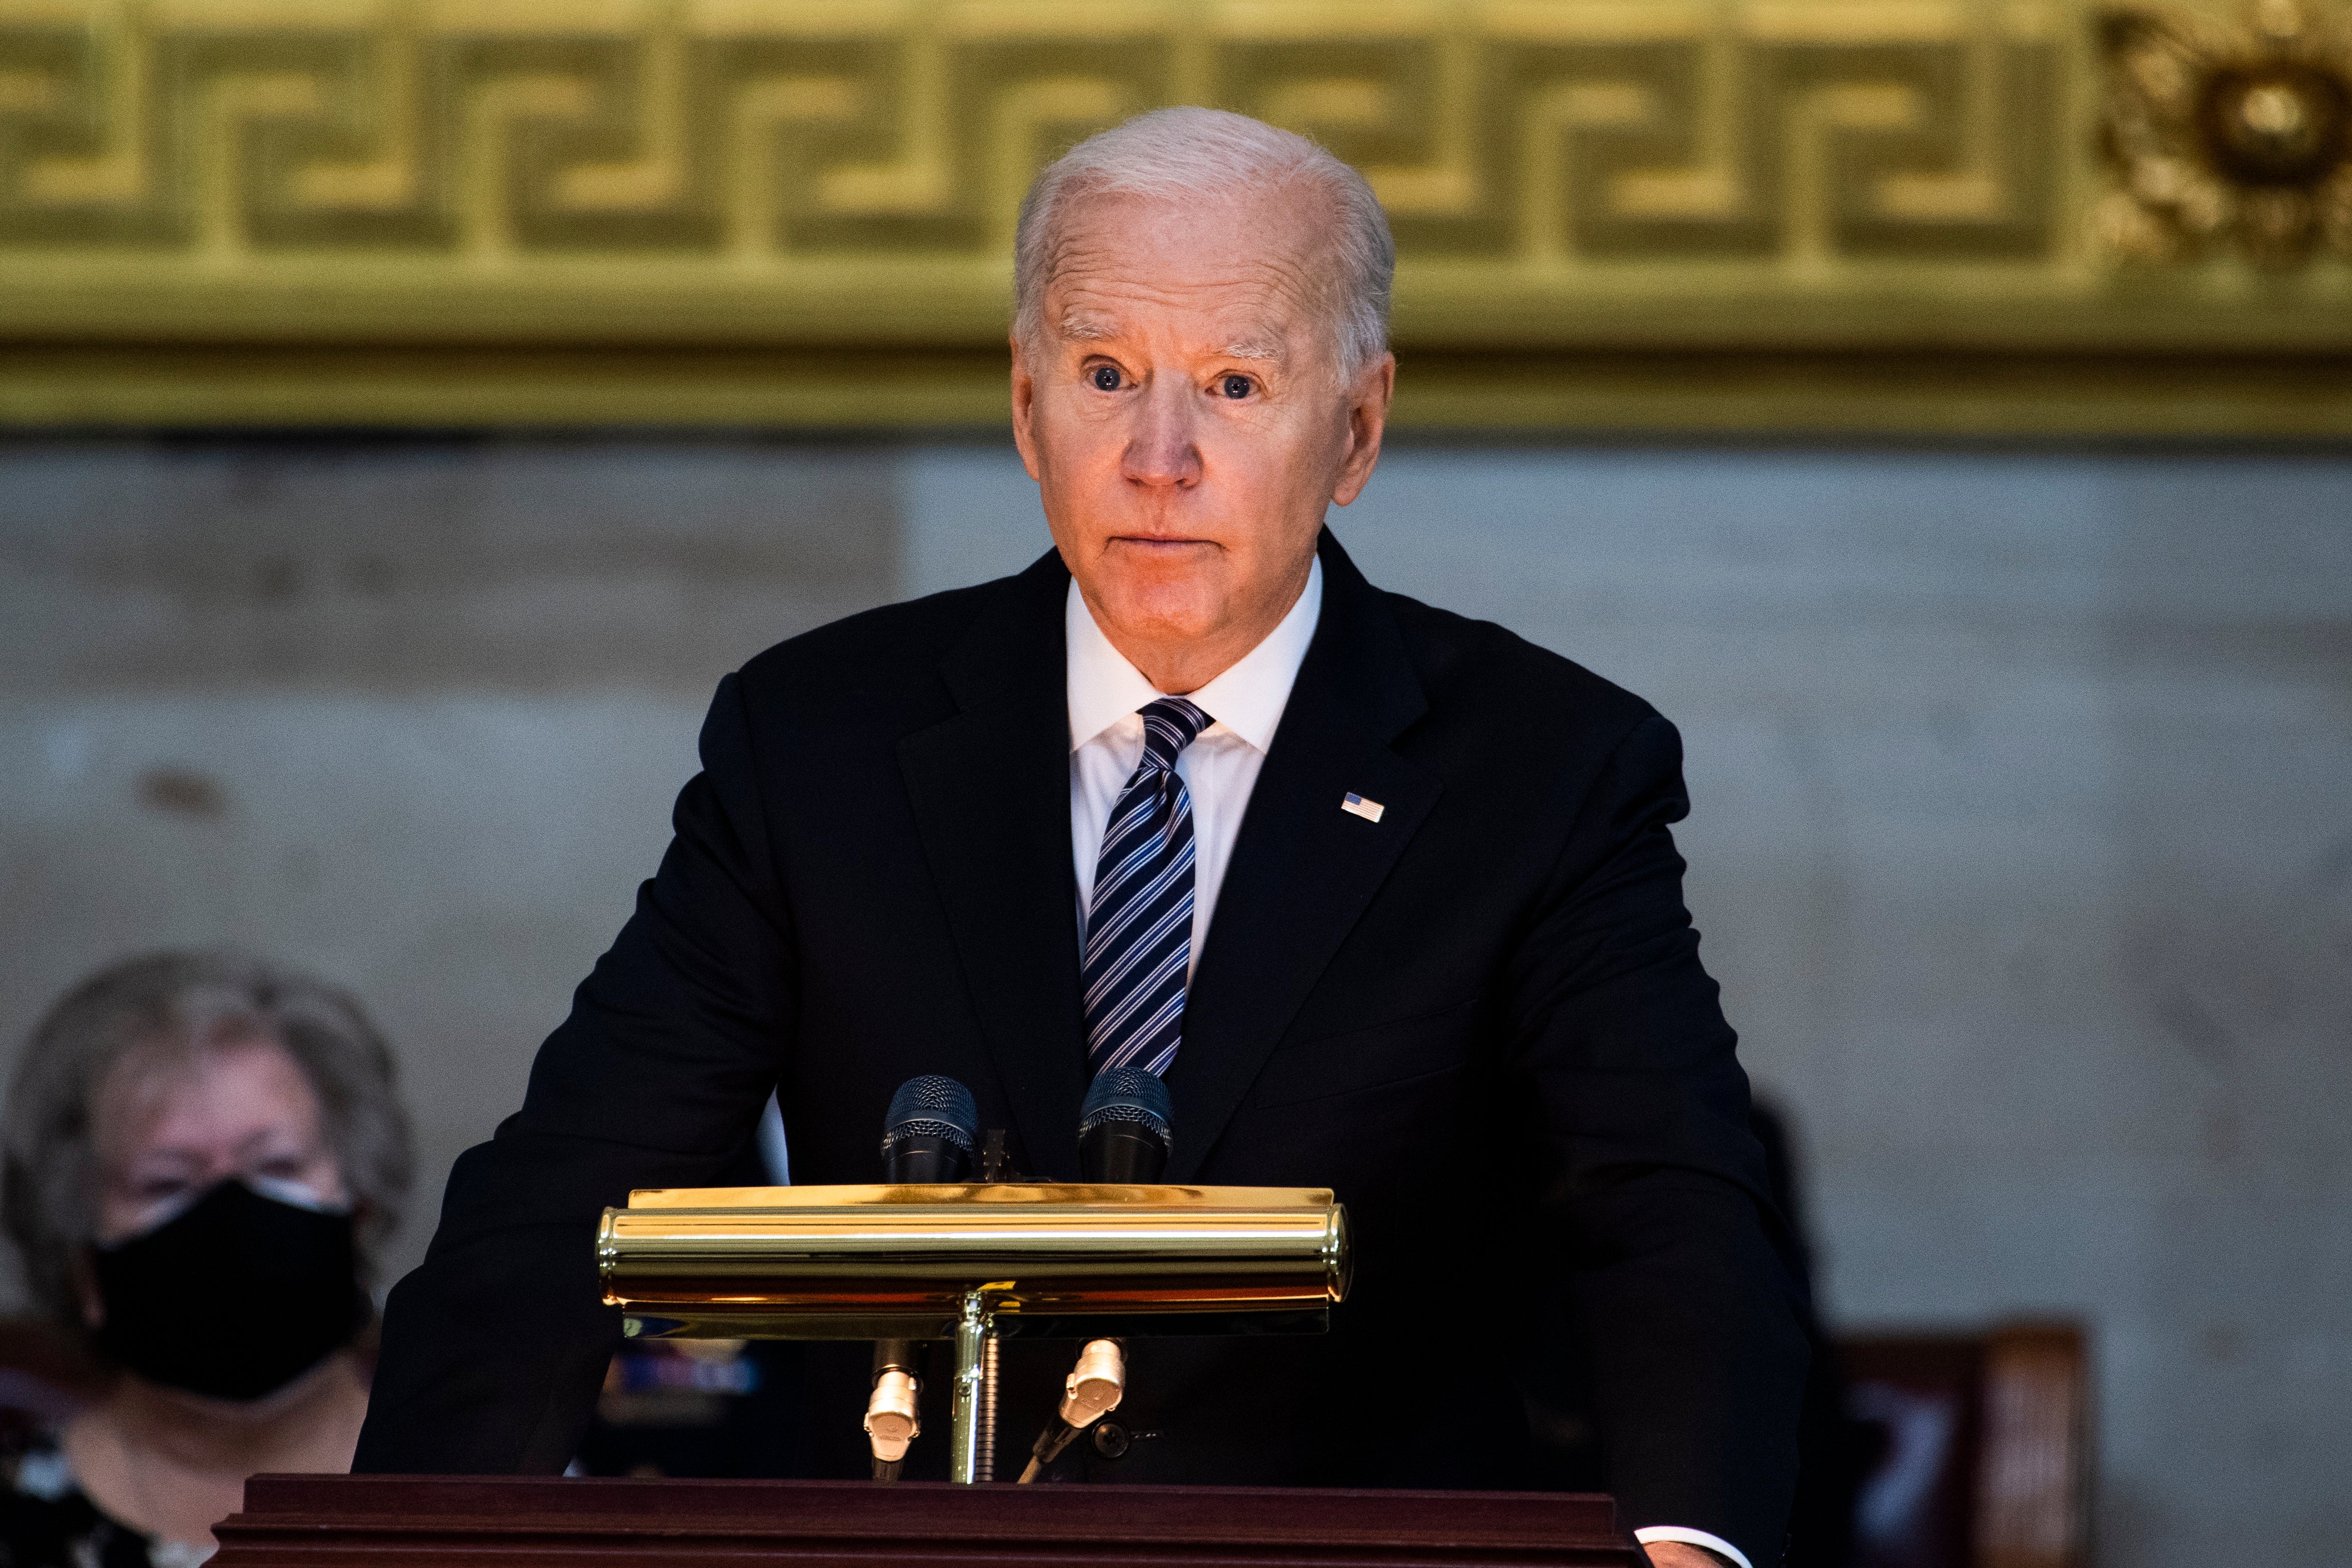 The Biden administration will soon begin blocking the entry of travelers from India, in light of the country’s massive Covid outbreak